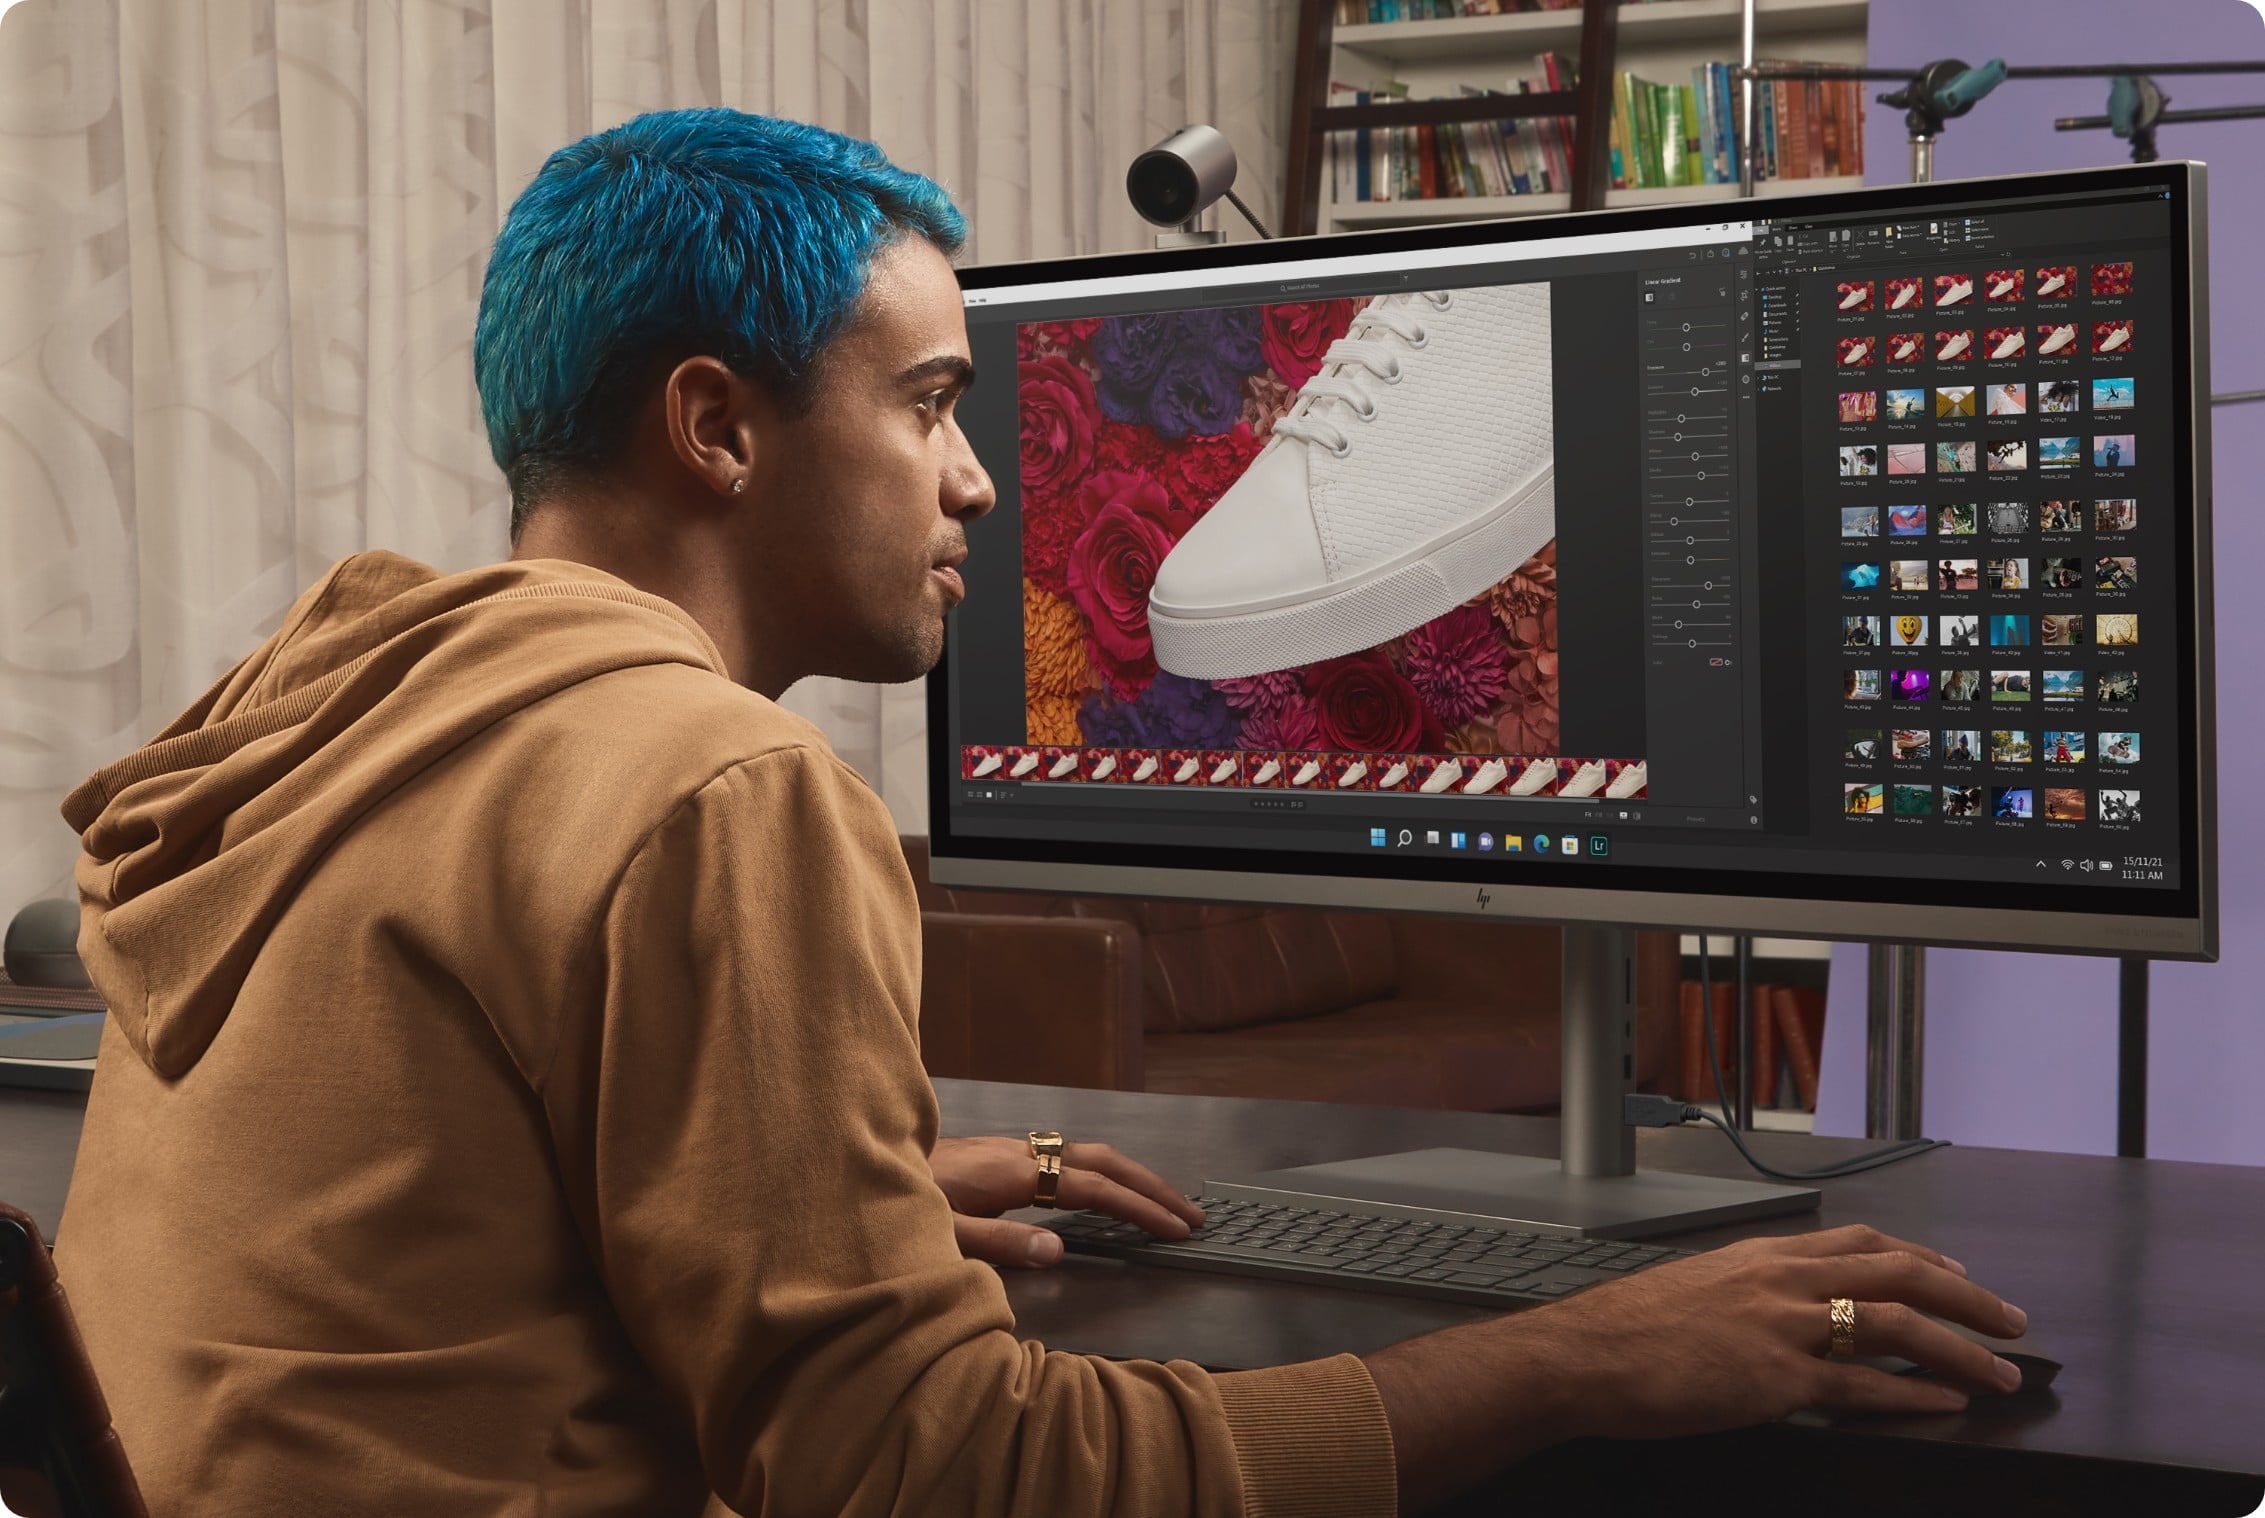 A man editing photos on an HP ENVY 34-inch All-in-One Desktop